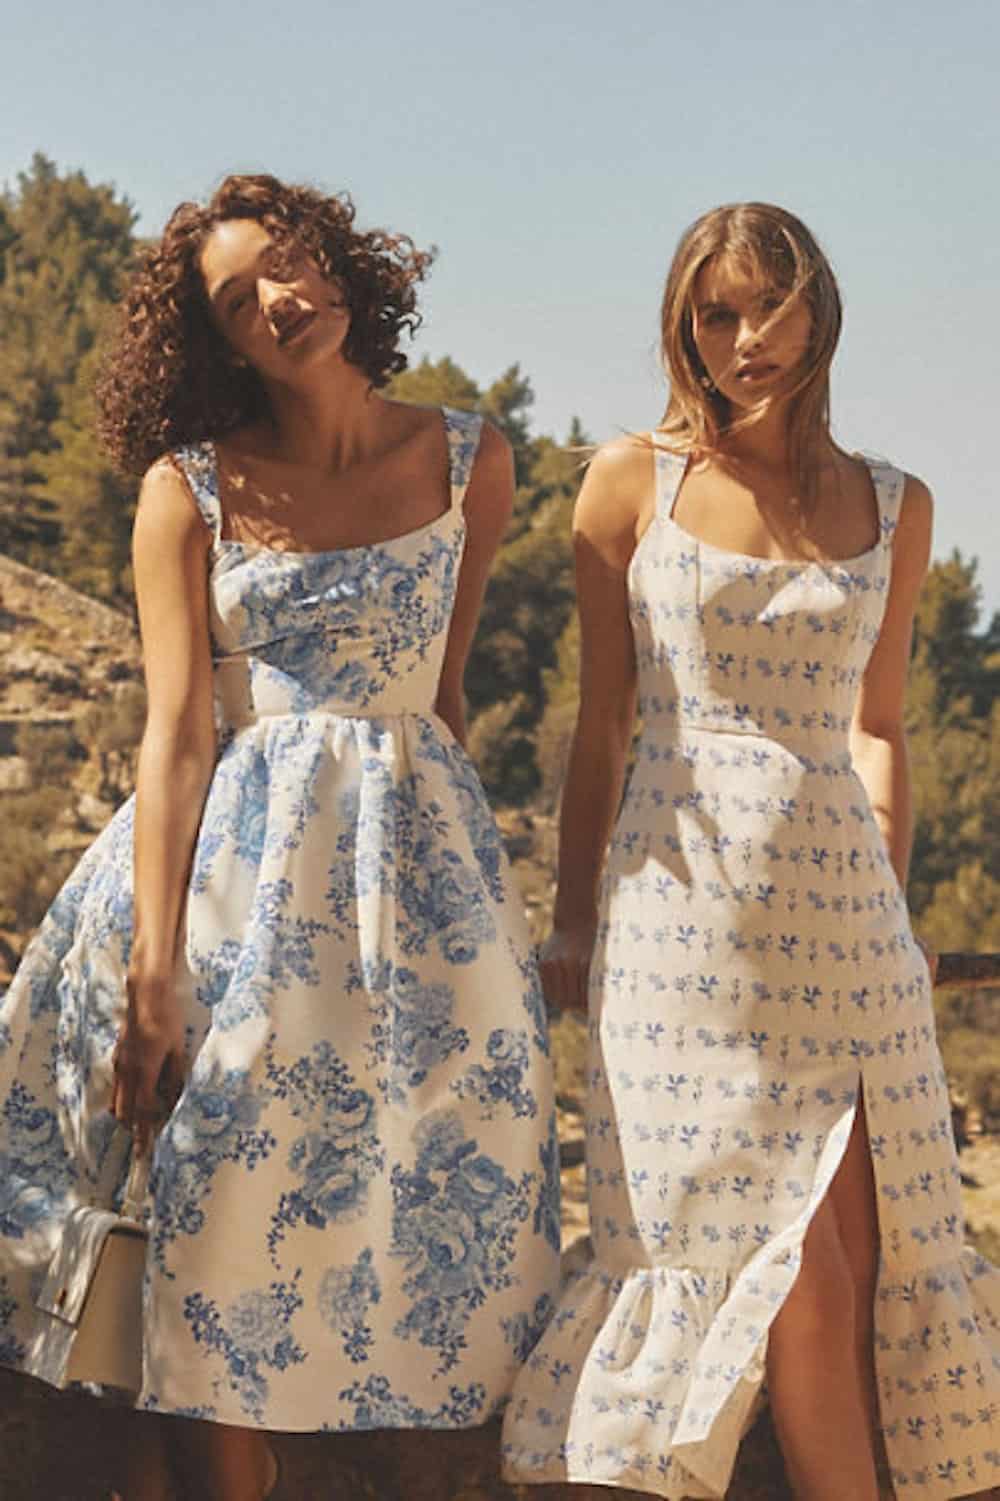 image of two women wearing blue and white floral dresses